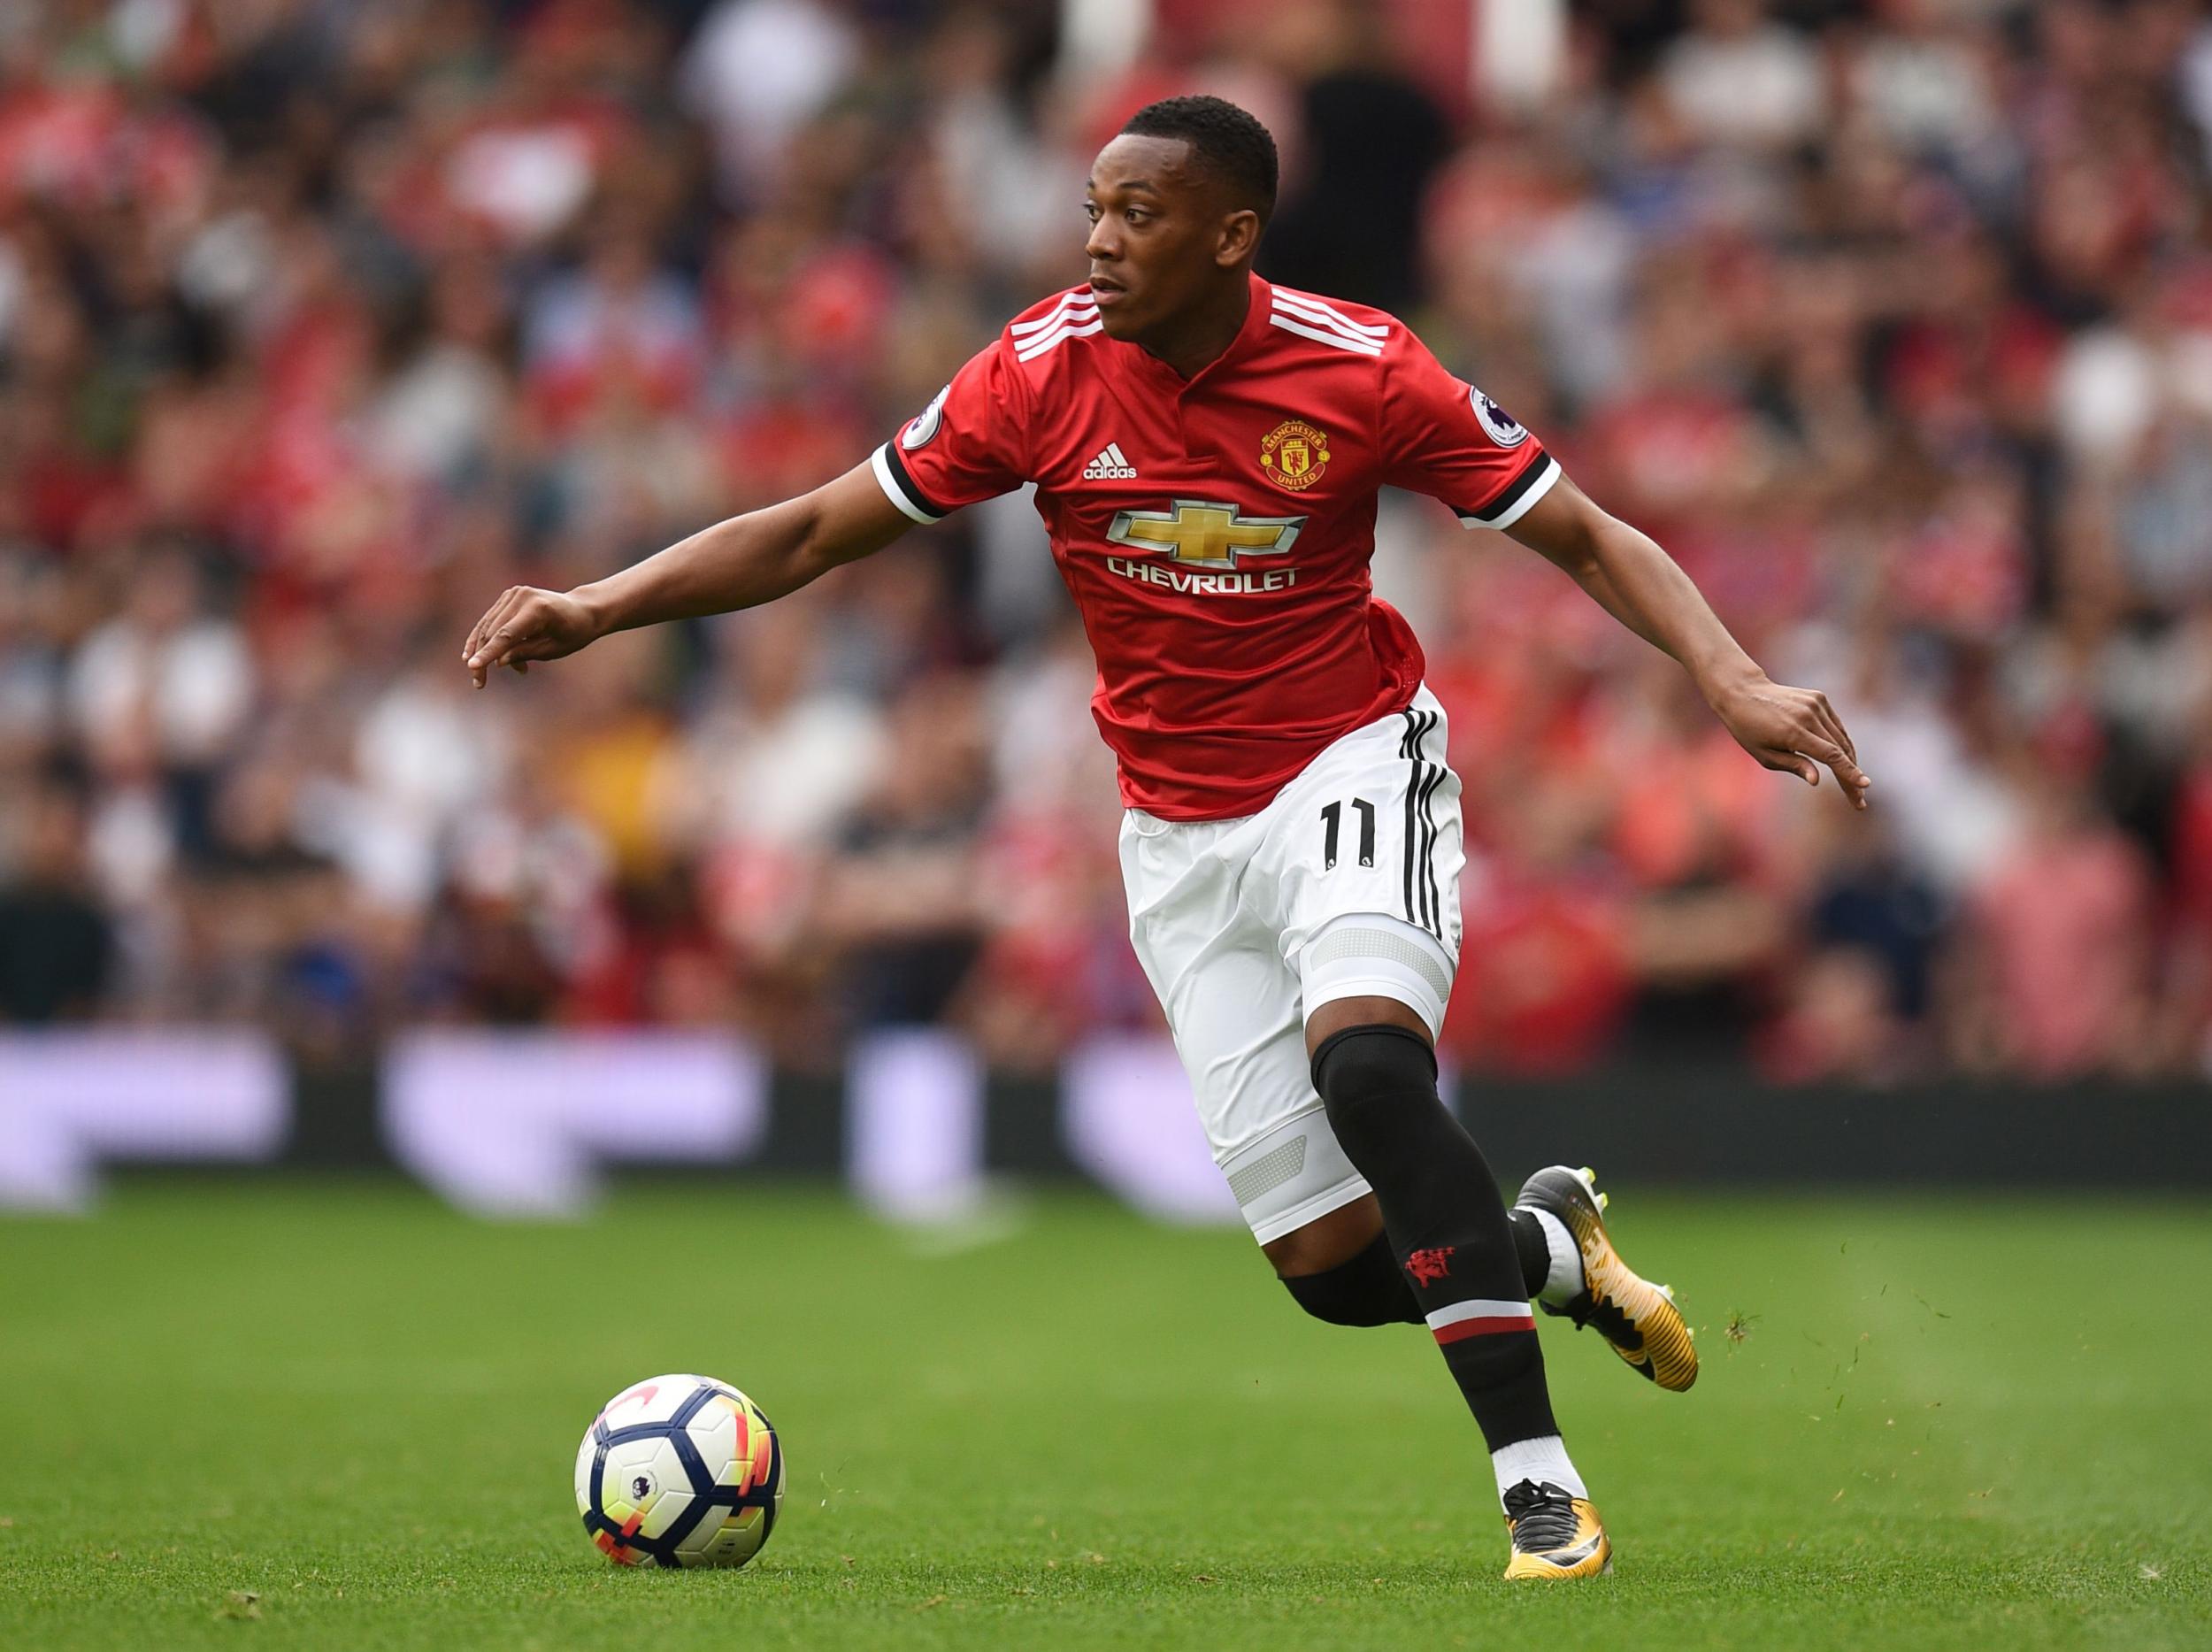 Martial scored after coming on in the second-half